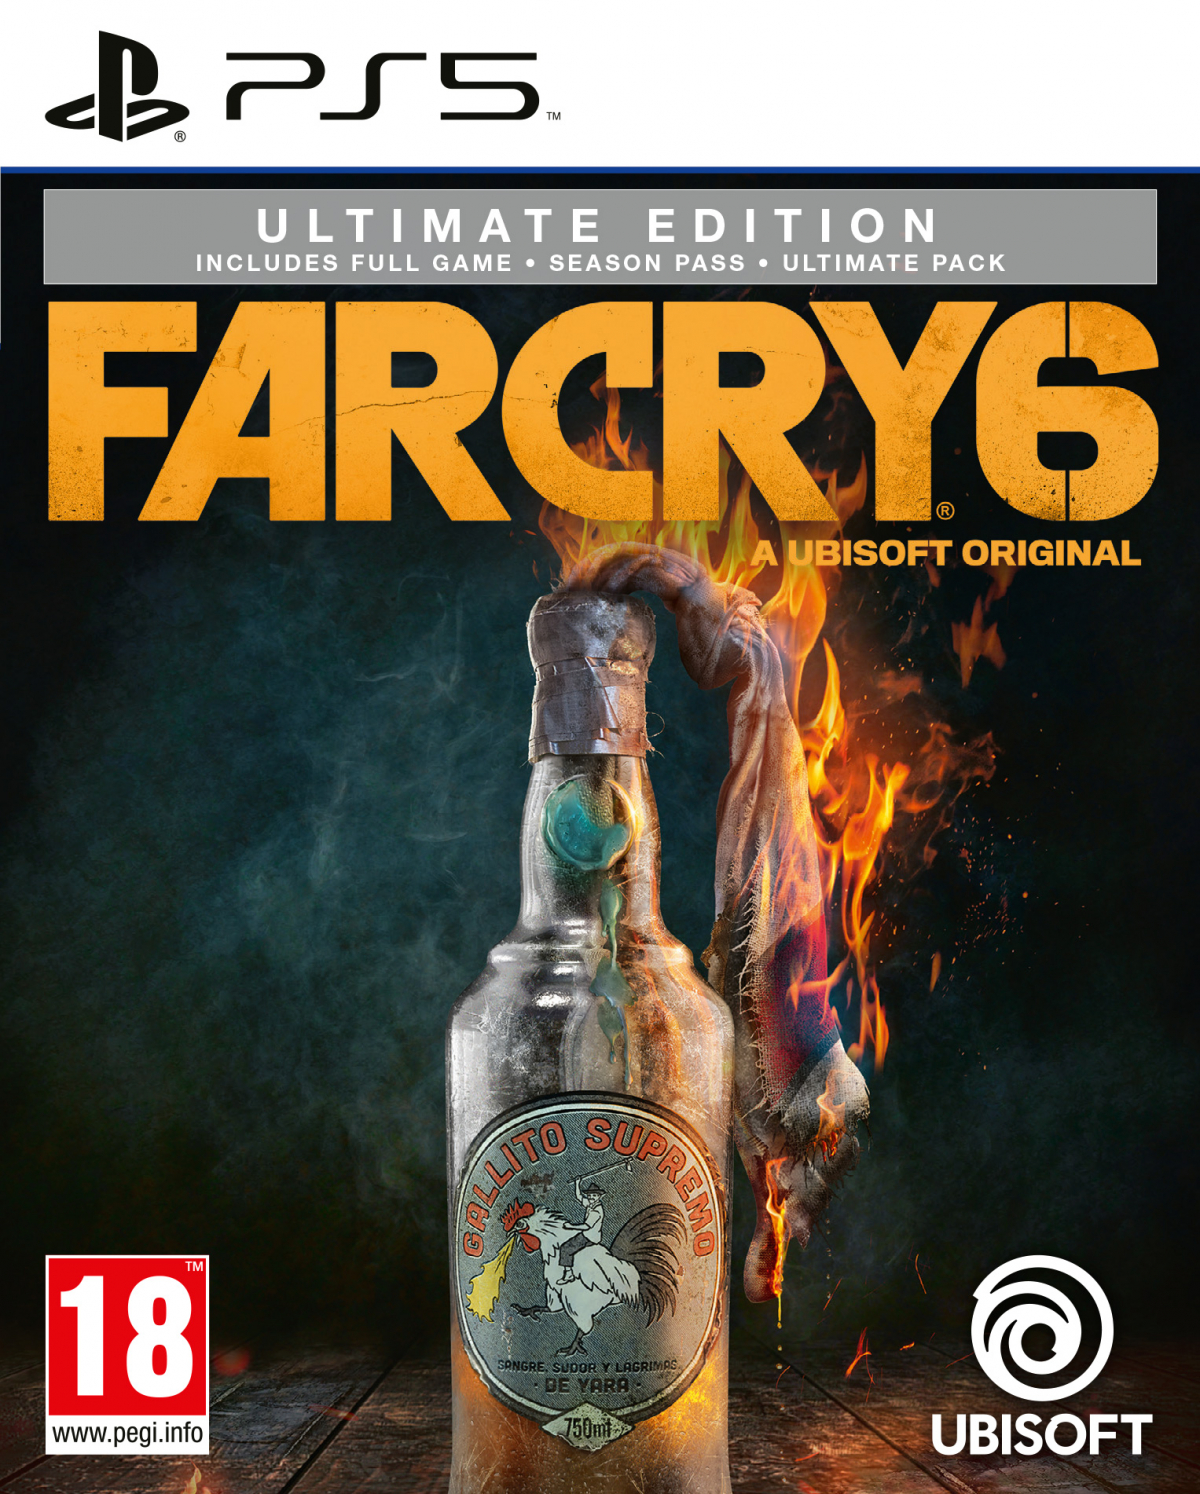 PS5 Far Cry 6 Ultimate Edition